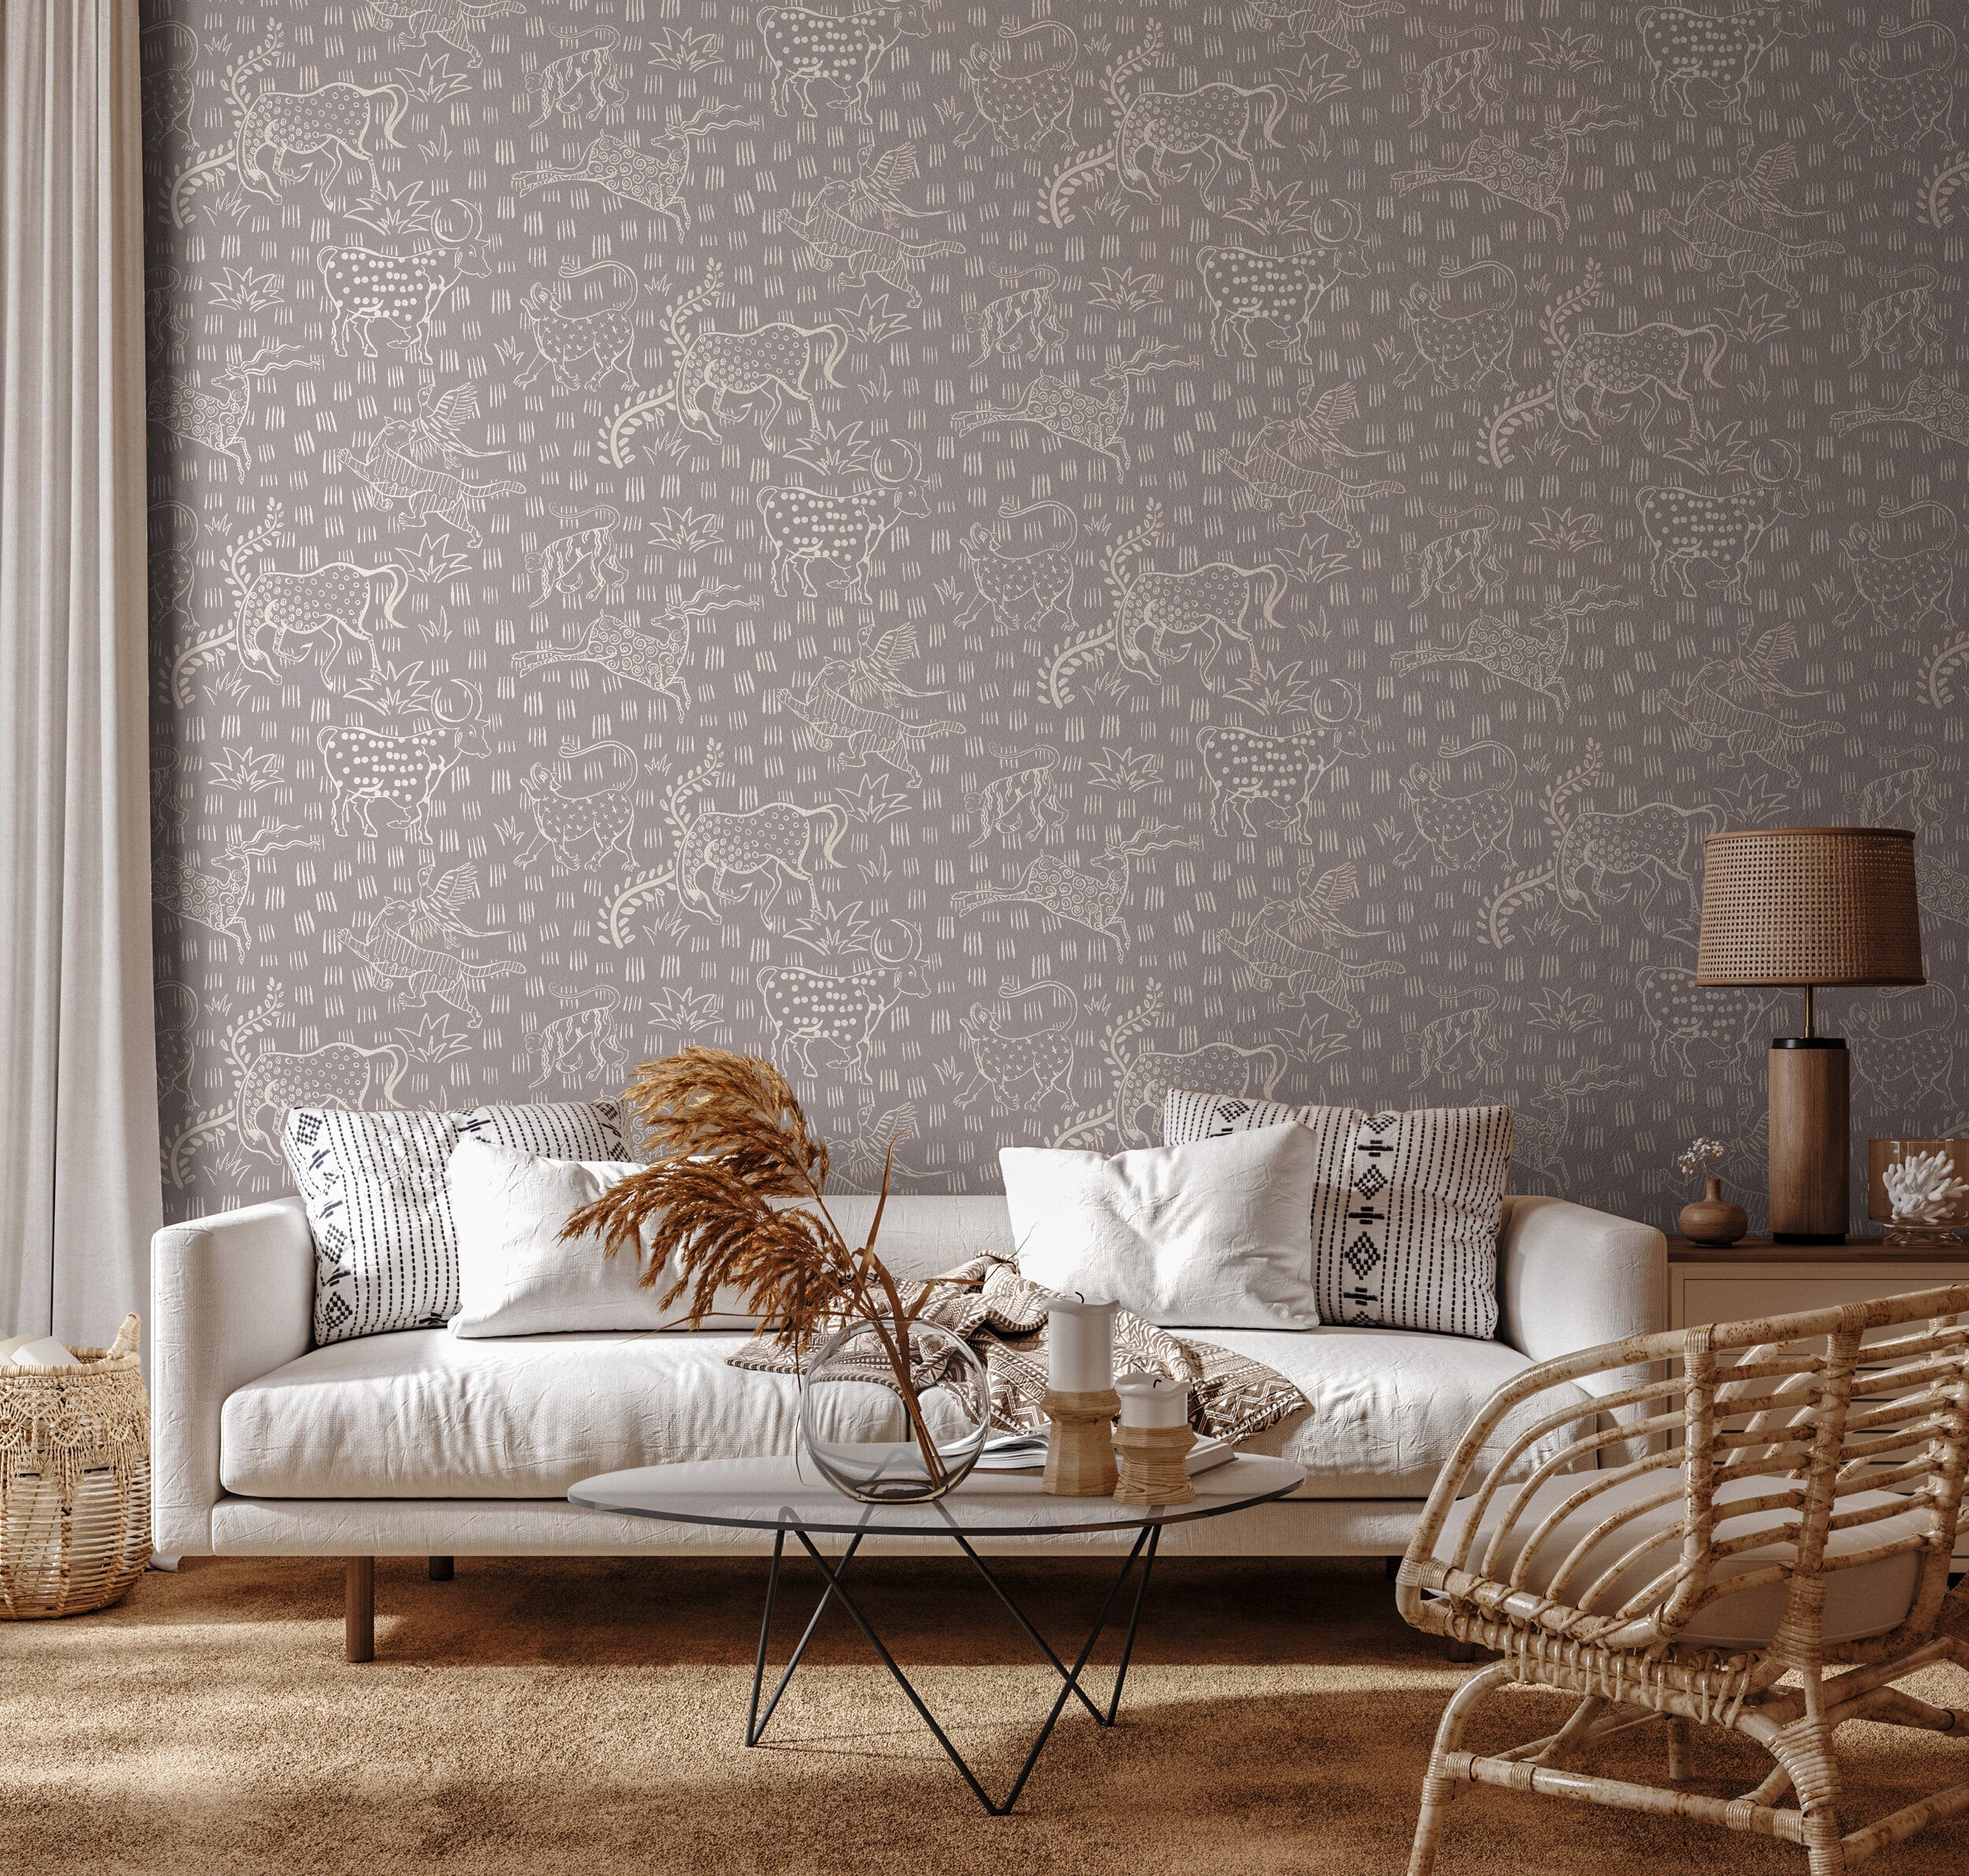 A livingroom furnished in neutral midcentury furniture with a wall papered in a playful animal print in white and gray.